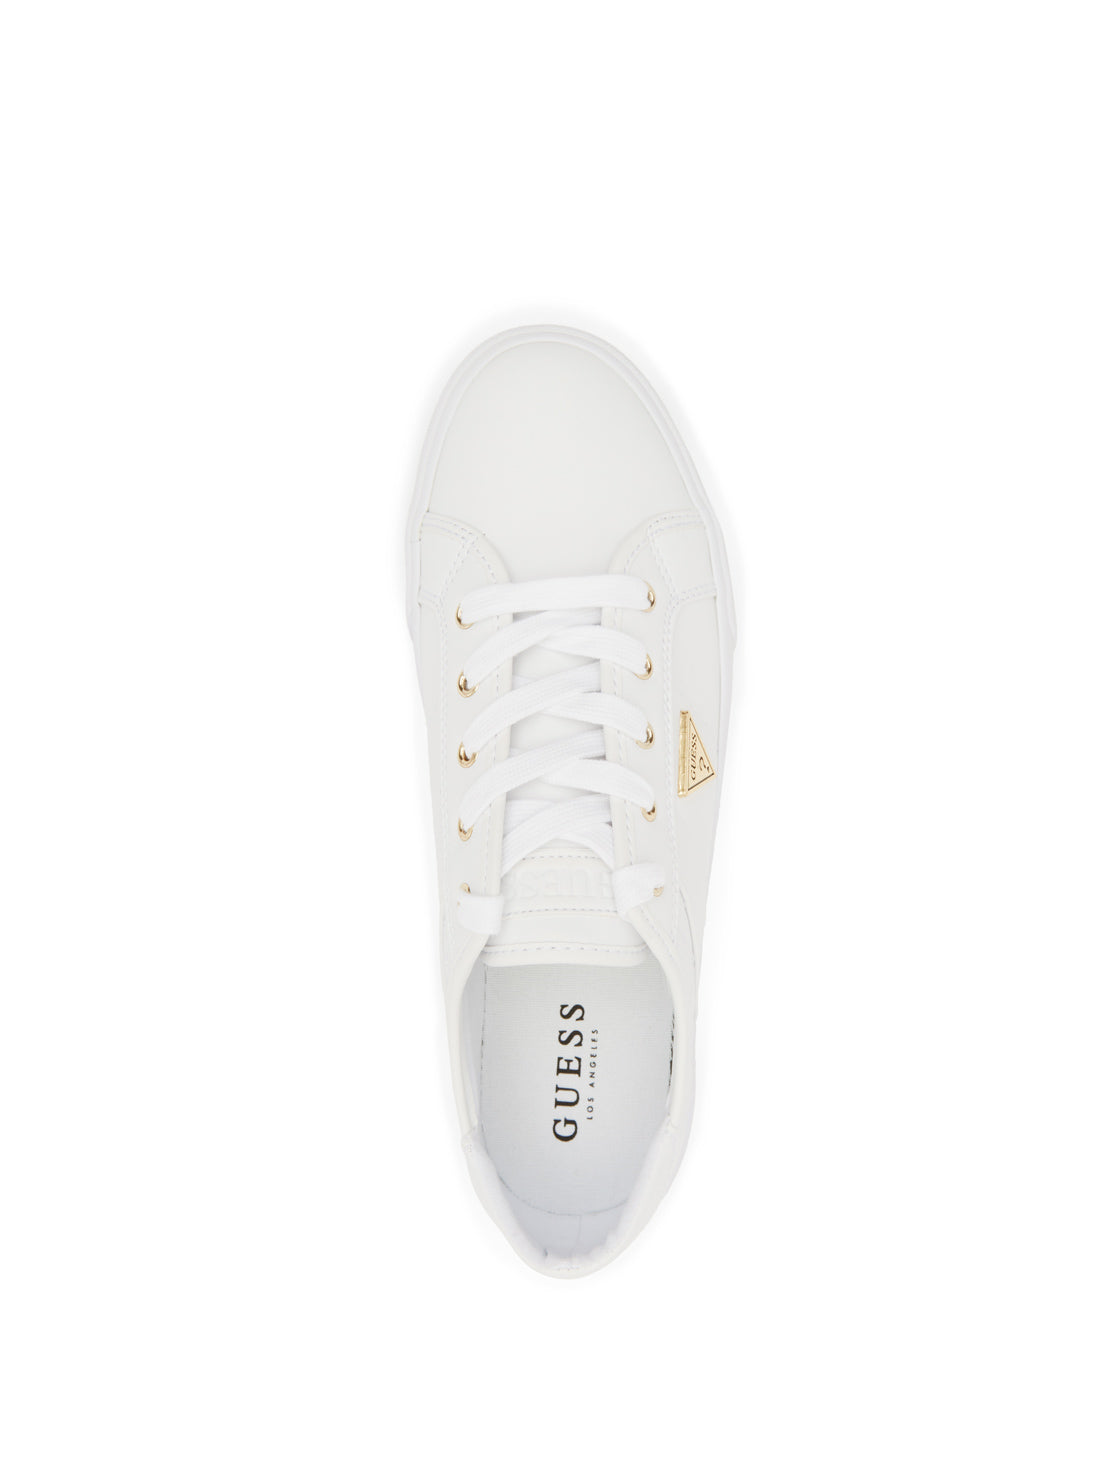 GUESS Women's White Comly Low Top Sneakers COMLY2-A Top View